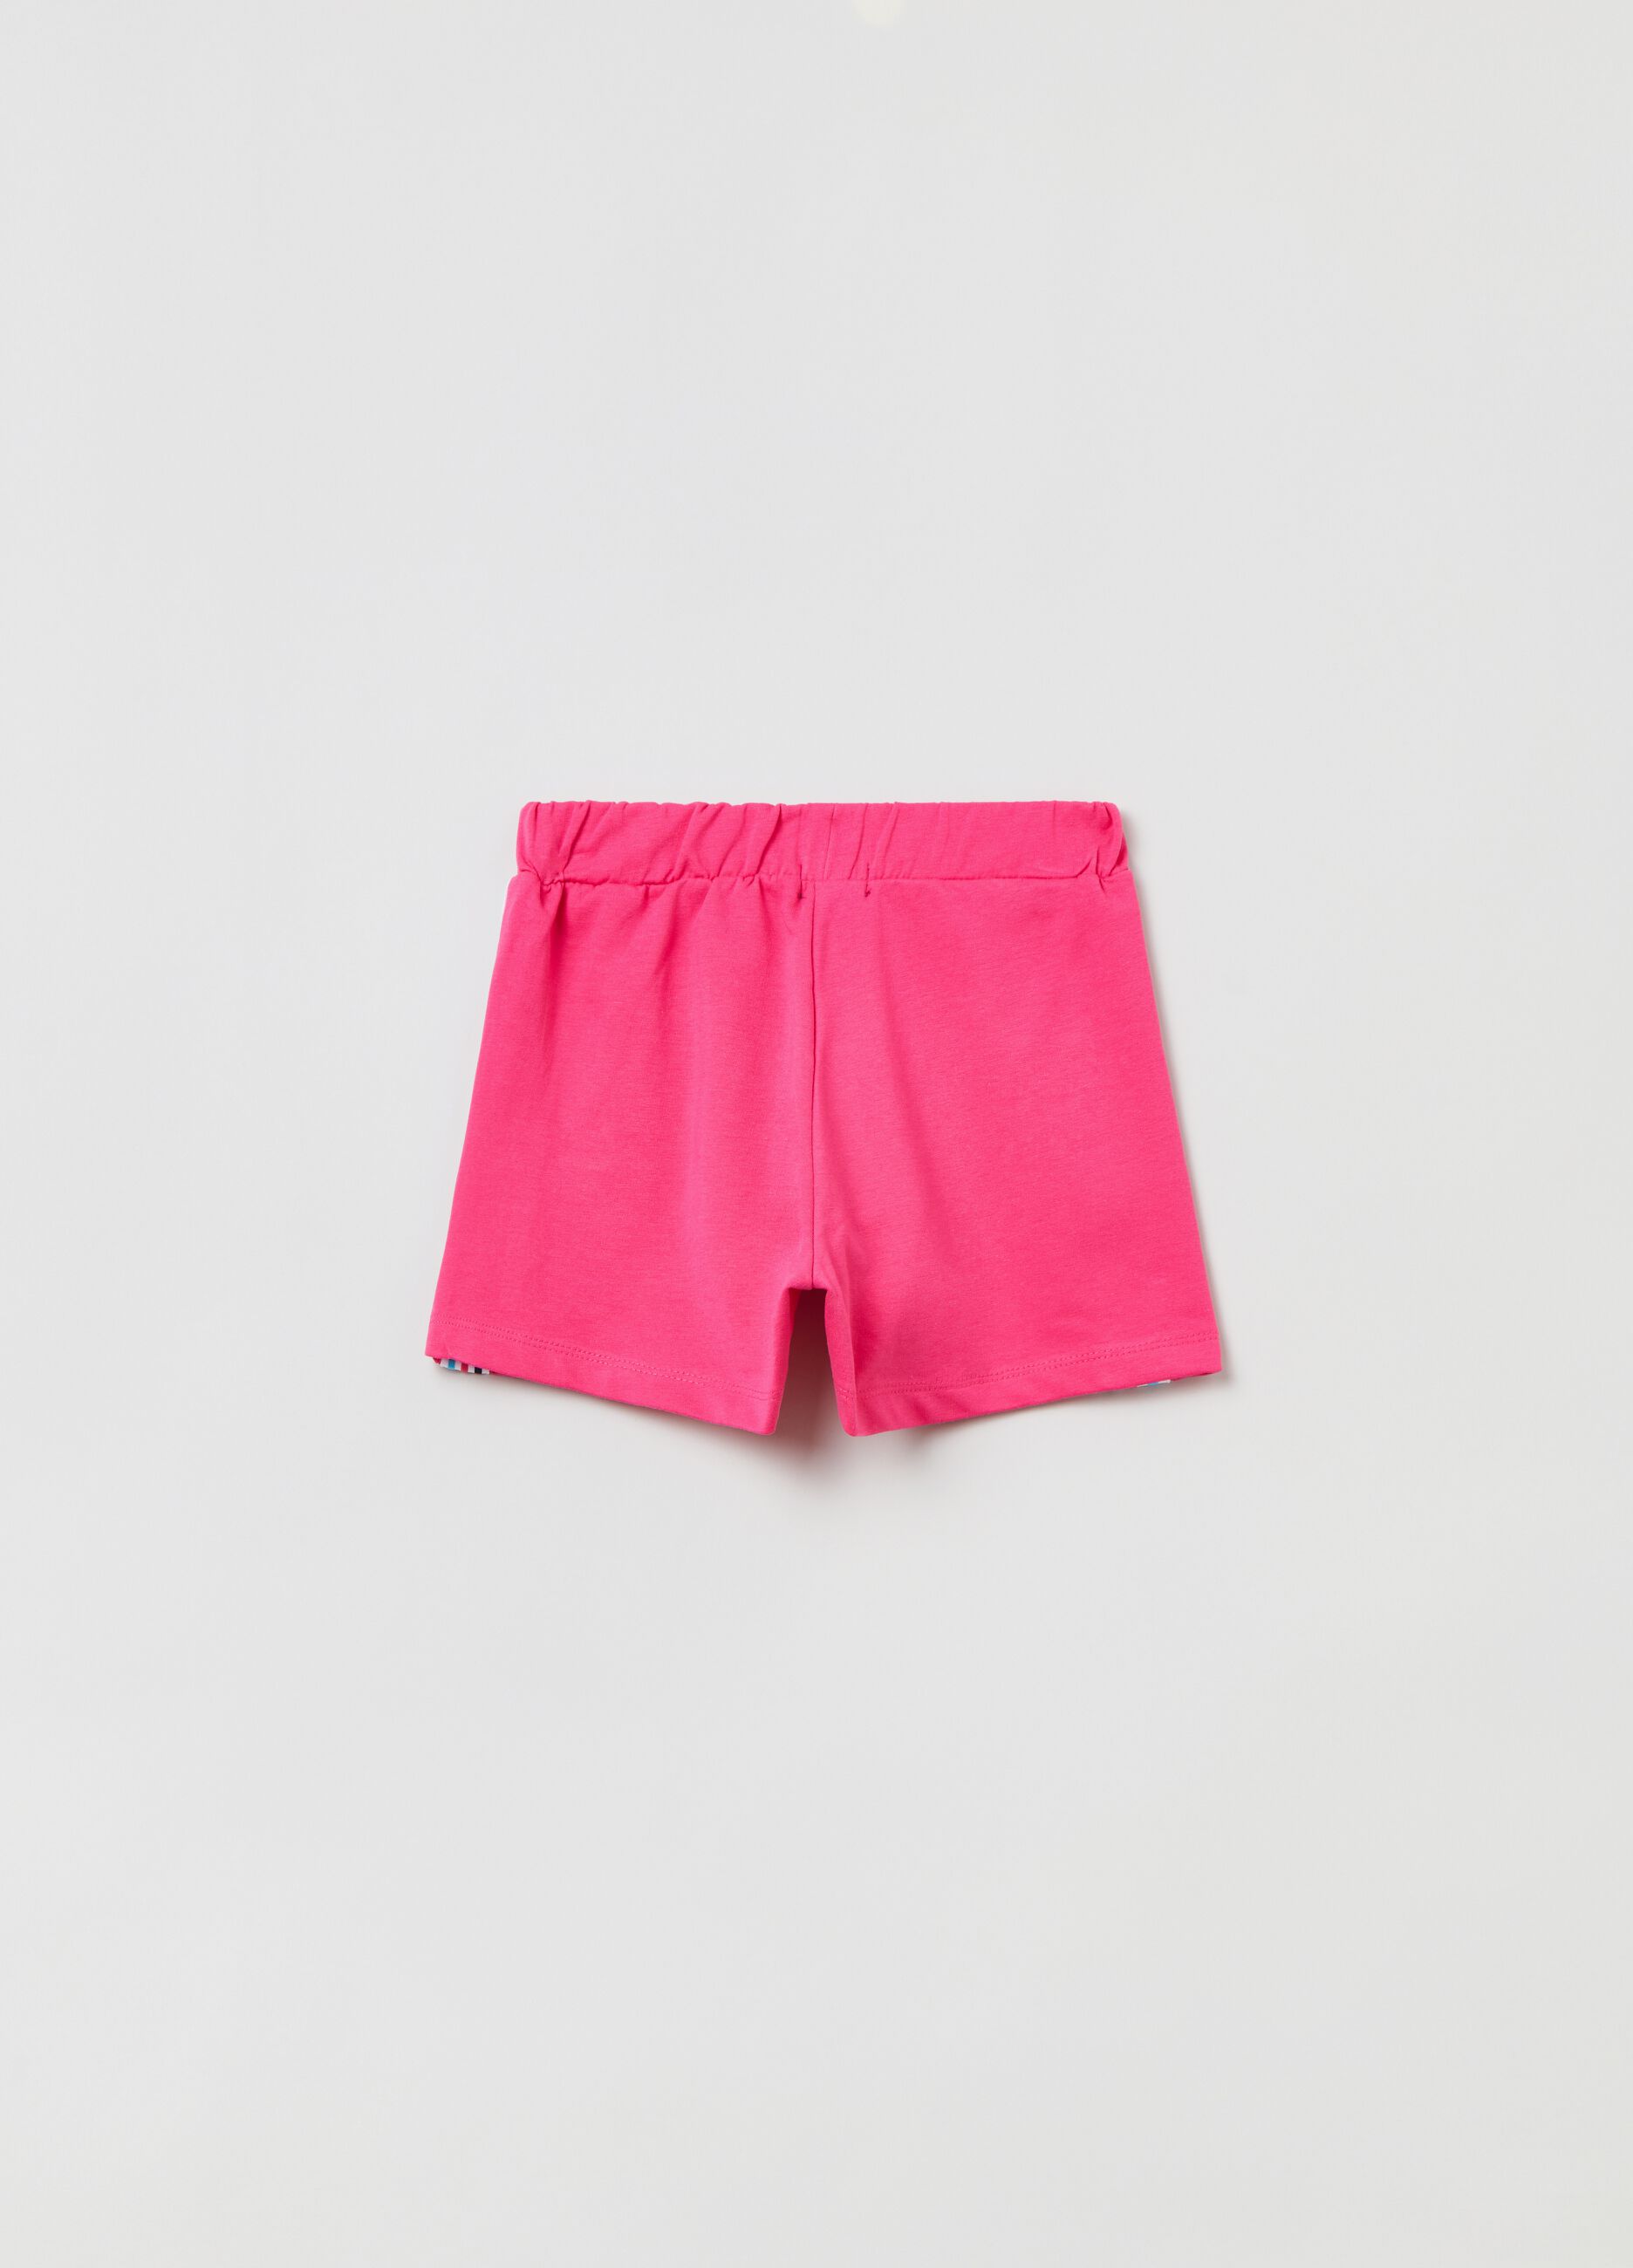 Cotton shorts with multicoloured bands